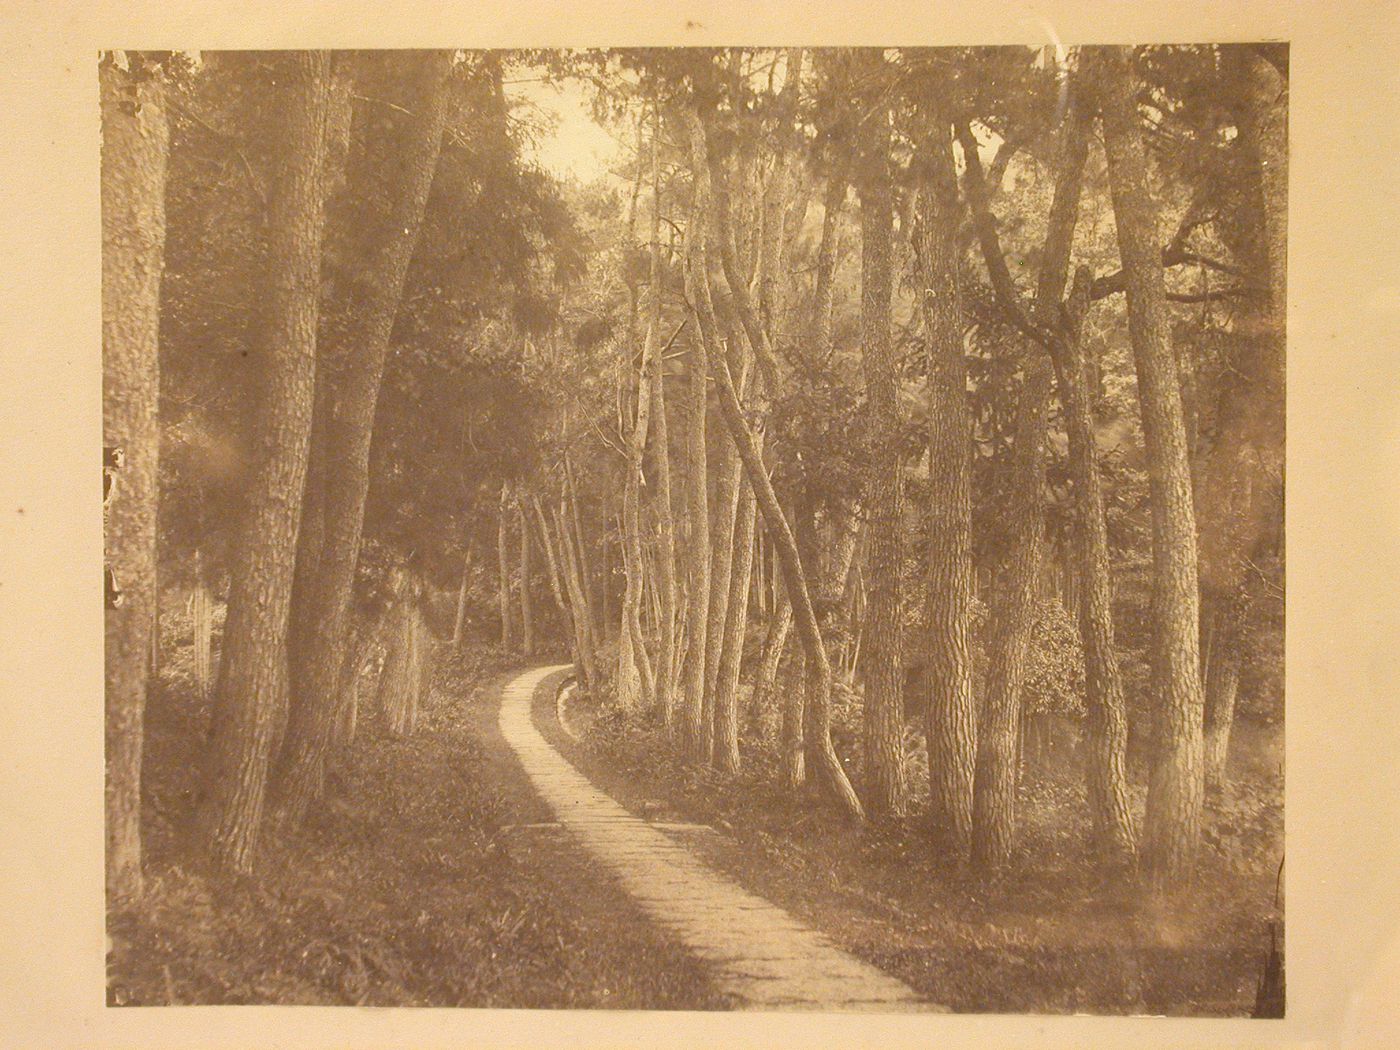 View of a walkway through the woods of Tien Dong (now Tiantong Forest Park), near Ningpo (now Ningbo), China